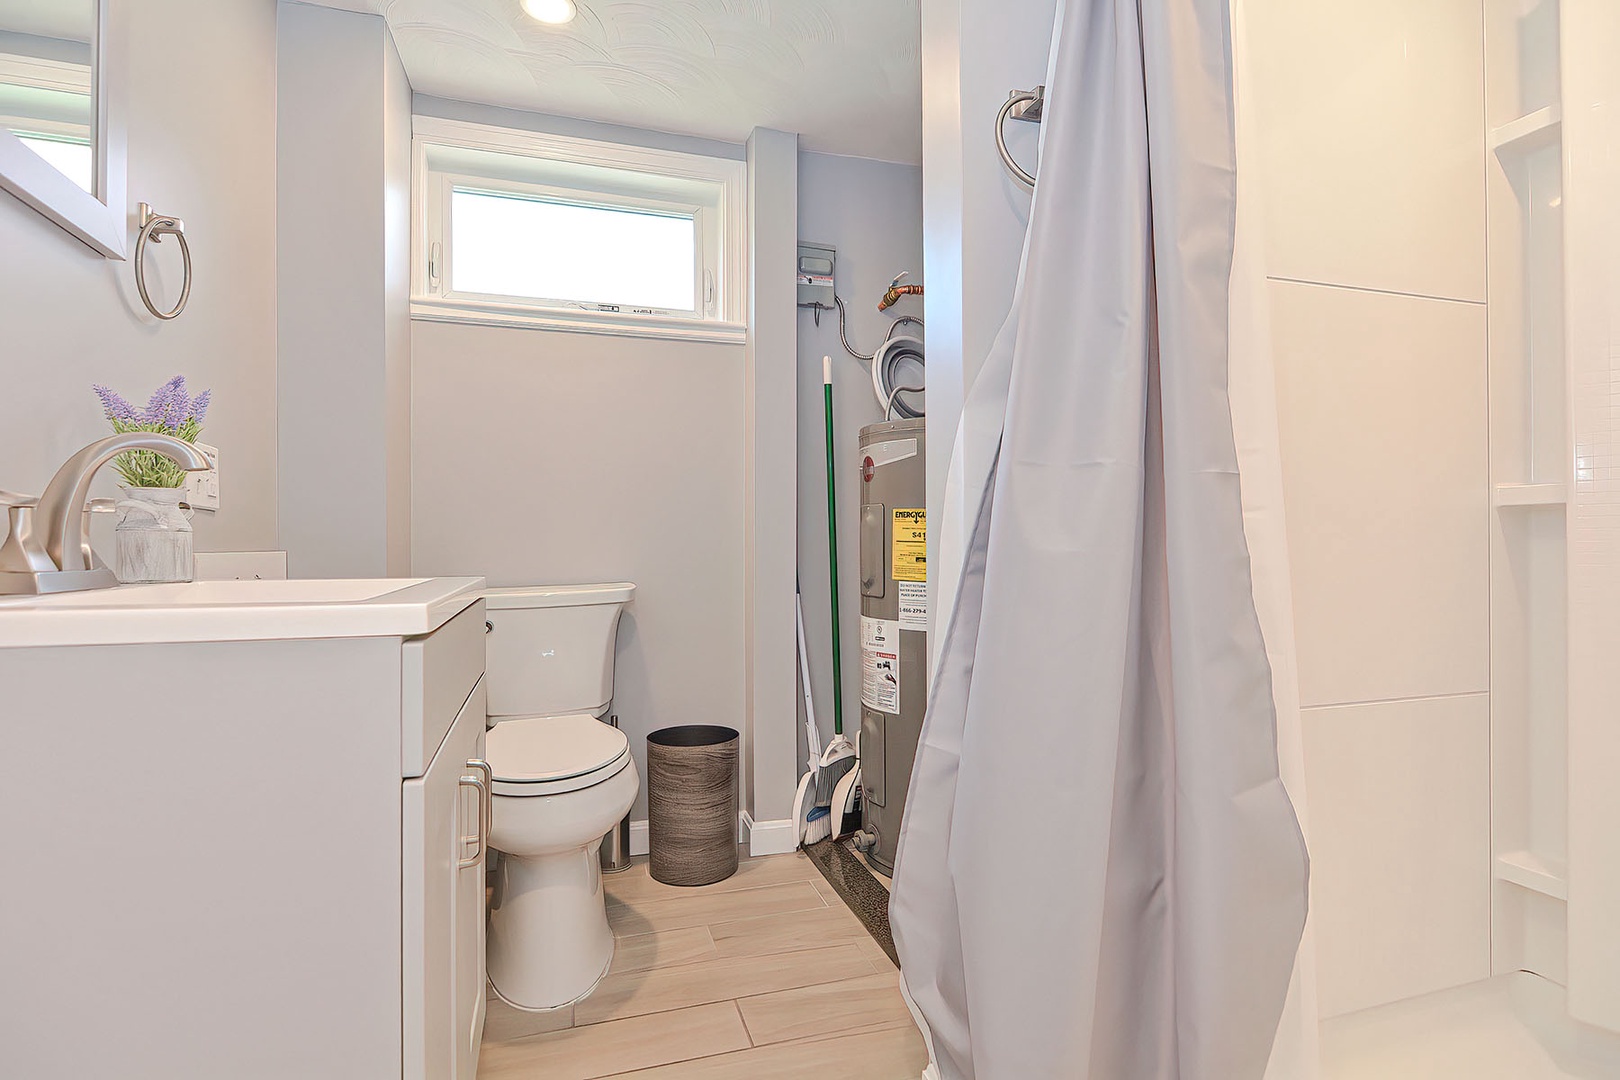 The bathroom has a walk-in shower, and washer/dryer